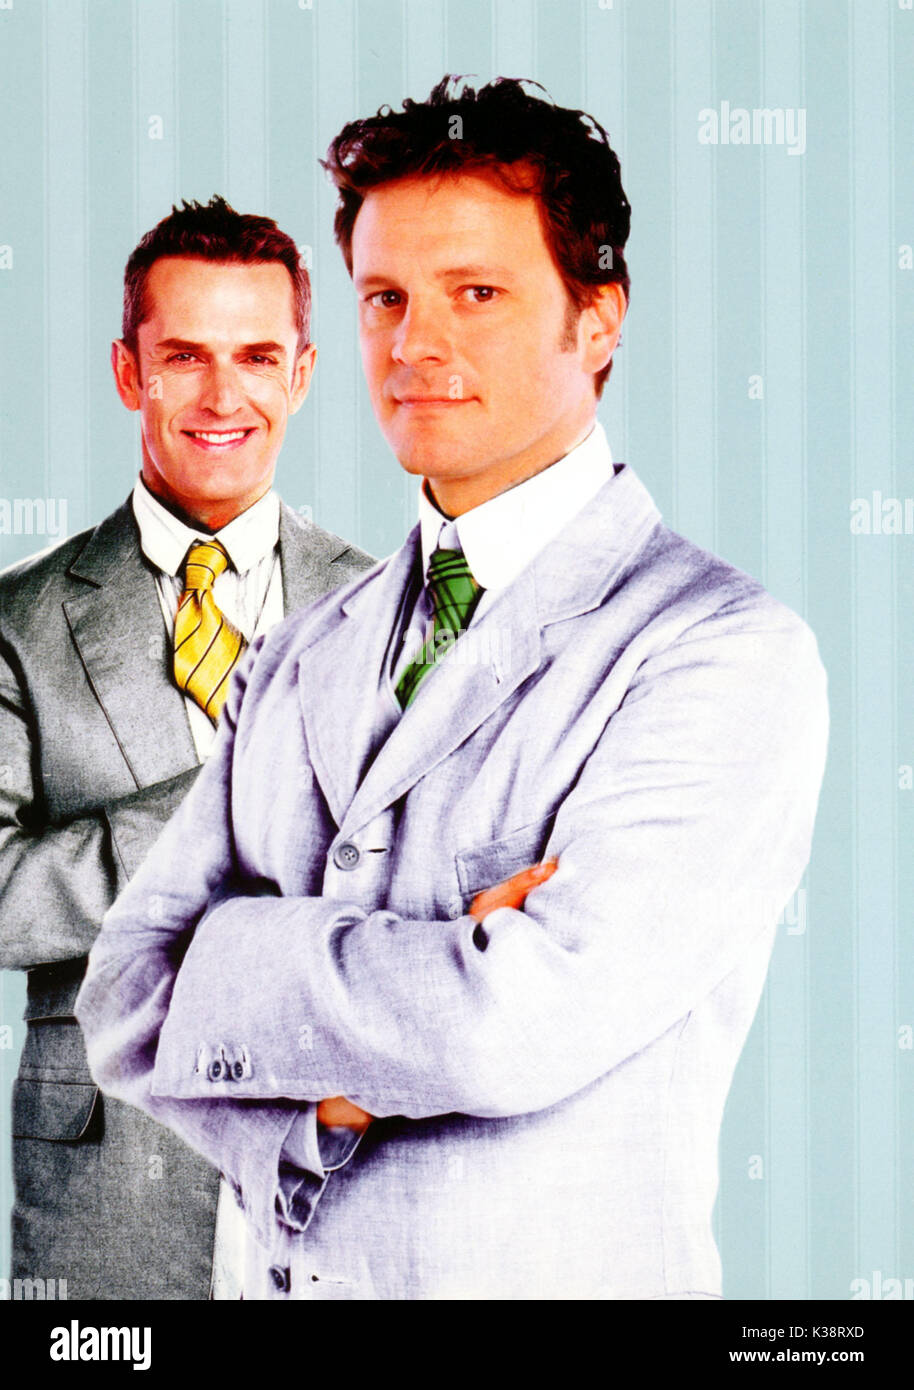 THE IMPORTANCE OF BEING EARNEST RUPERT EVERETT, COLIN FIRTH     Date: 2002 Stock Photo